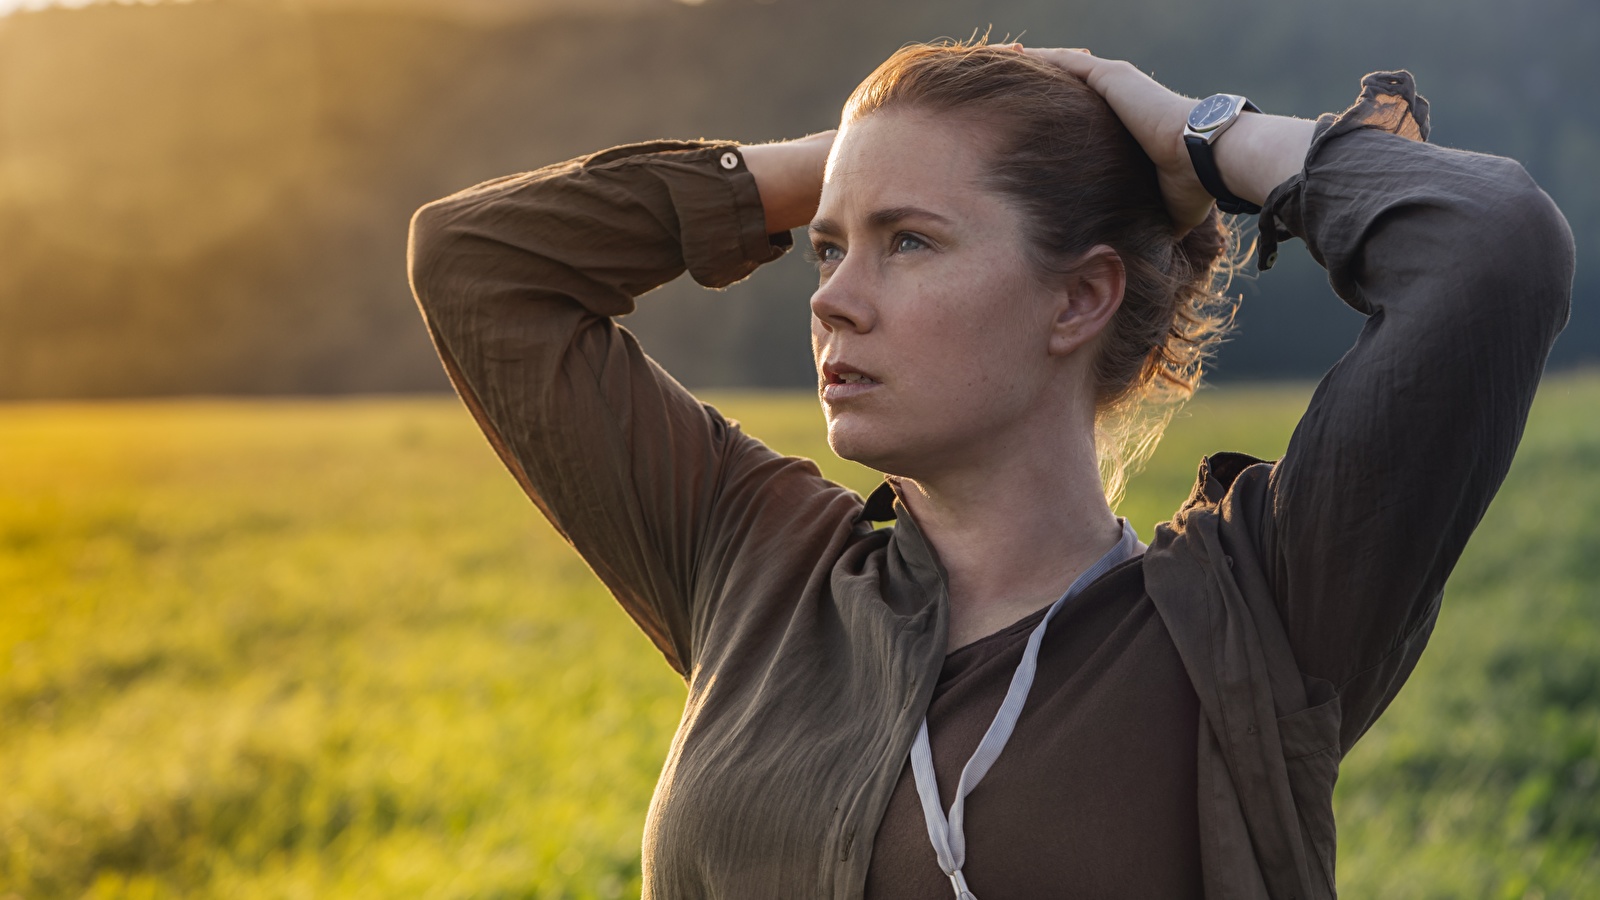 Arrival and the power of language - kontextor